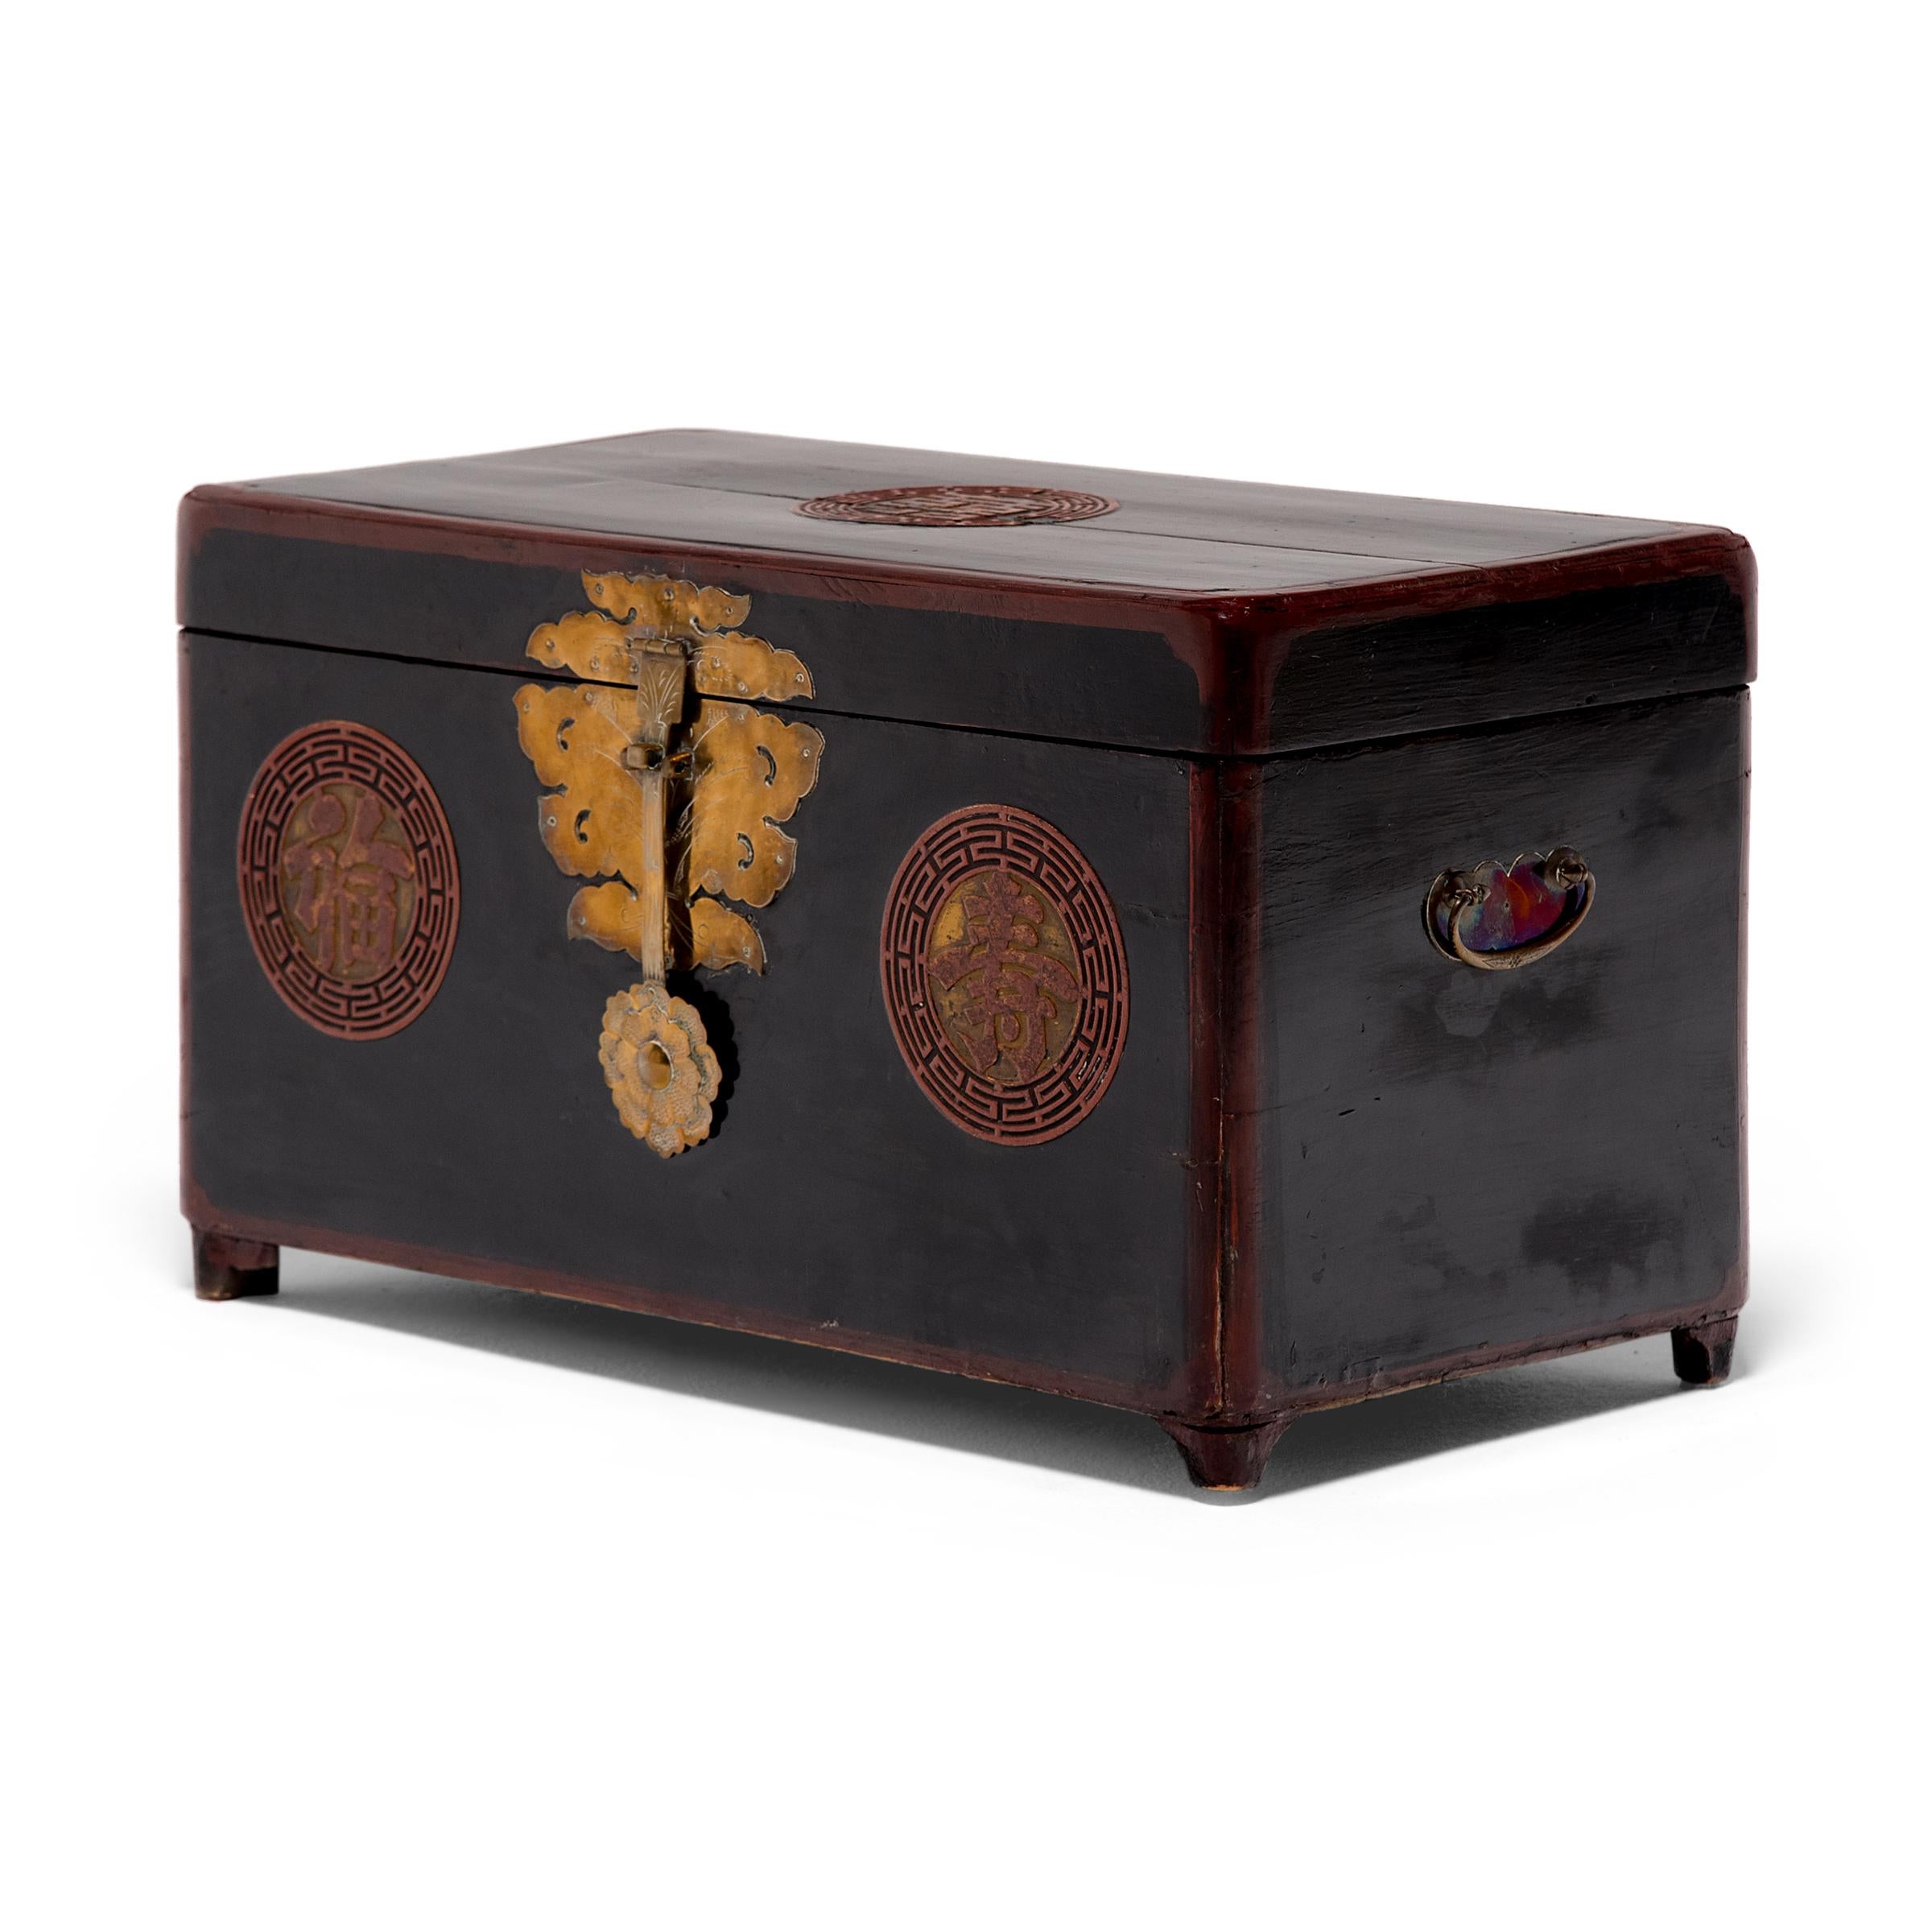 Dated to the early 20th century, this lacquered Korean wedding chest is decorated with round medallions conveying three blessings for a good life. Enclosed by lattice-like fret patterns, the medallions offer blessings of luck (?), longevity (?), and